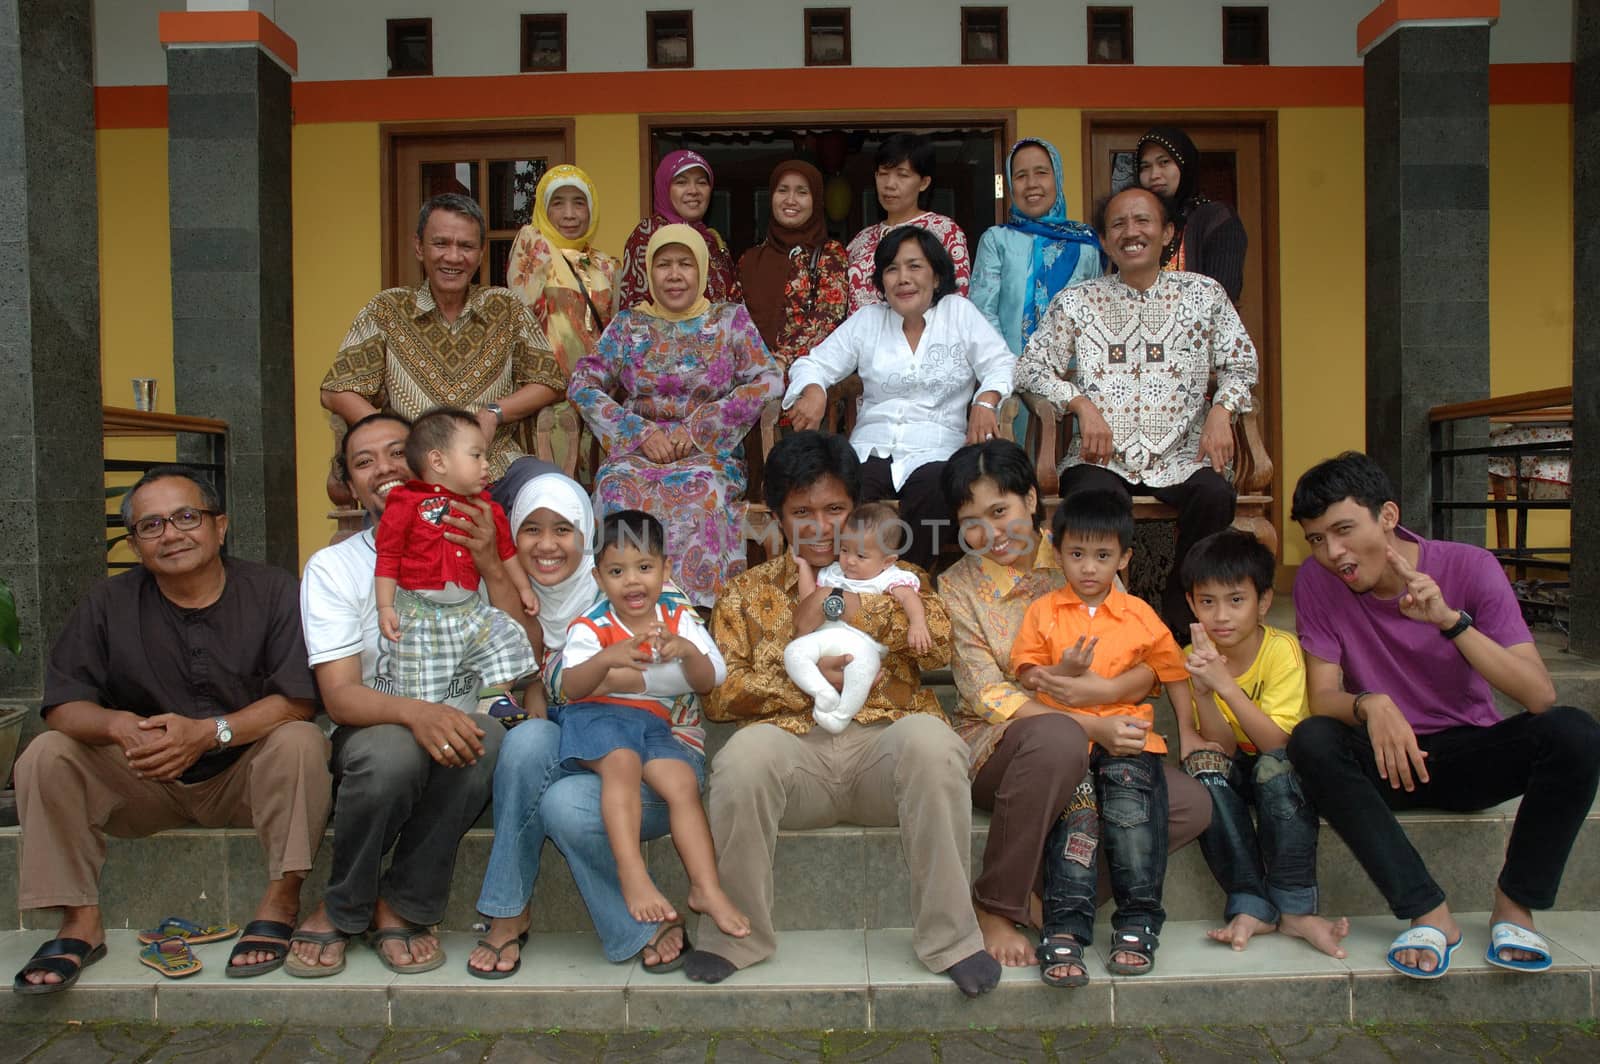 bandung, indonesia-december 19, 2010: large group of family gathering together in front of house.